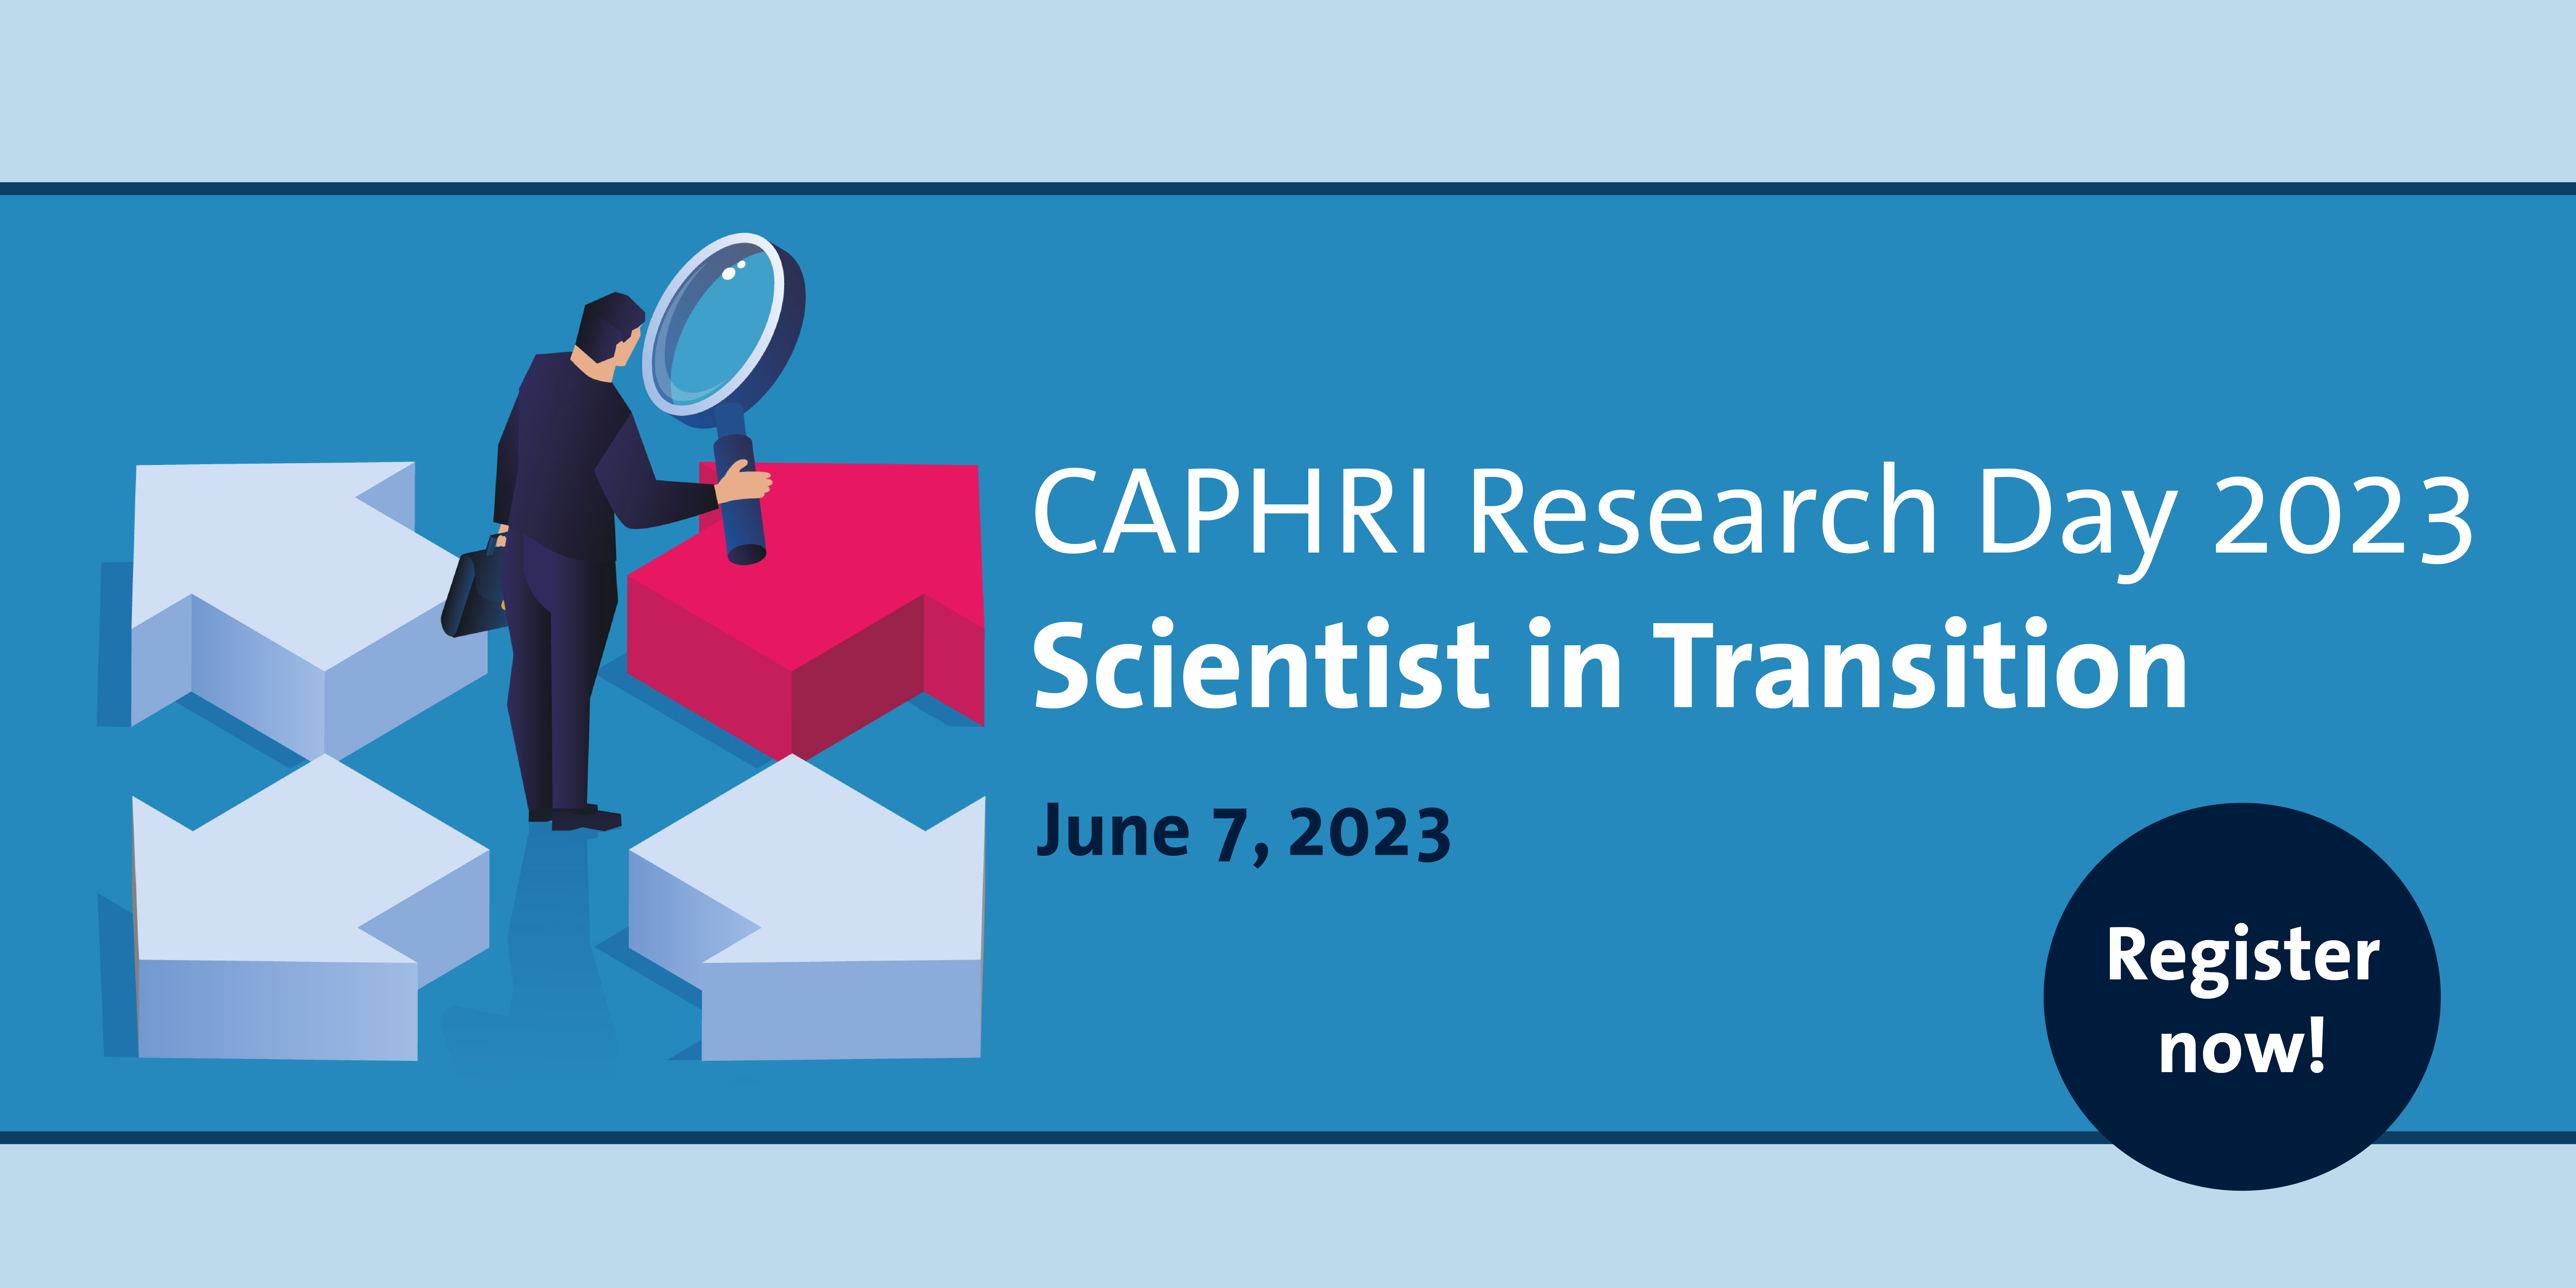 CAPHRI Research Day 2023